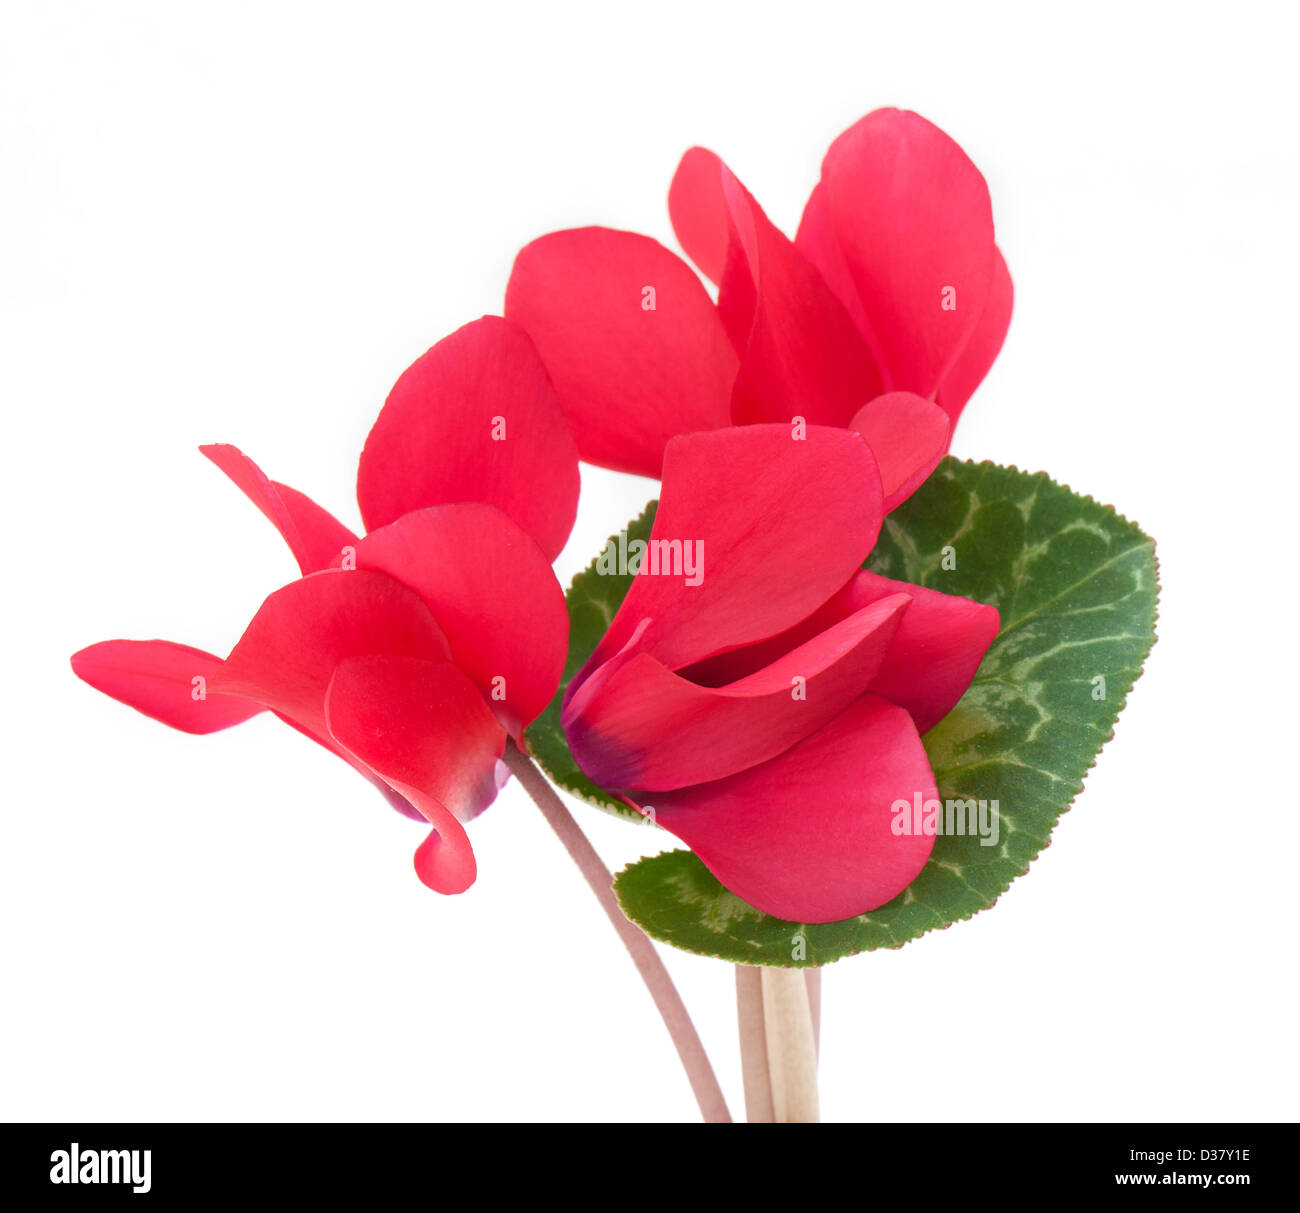 Cyclamen flower isolated on white background Stock Photo